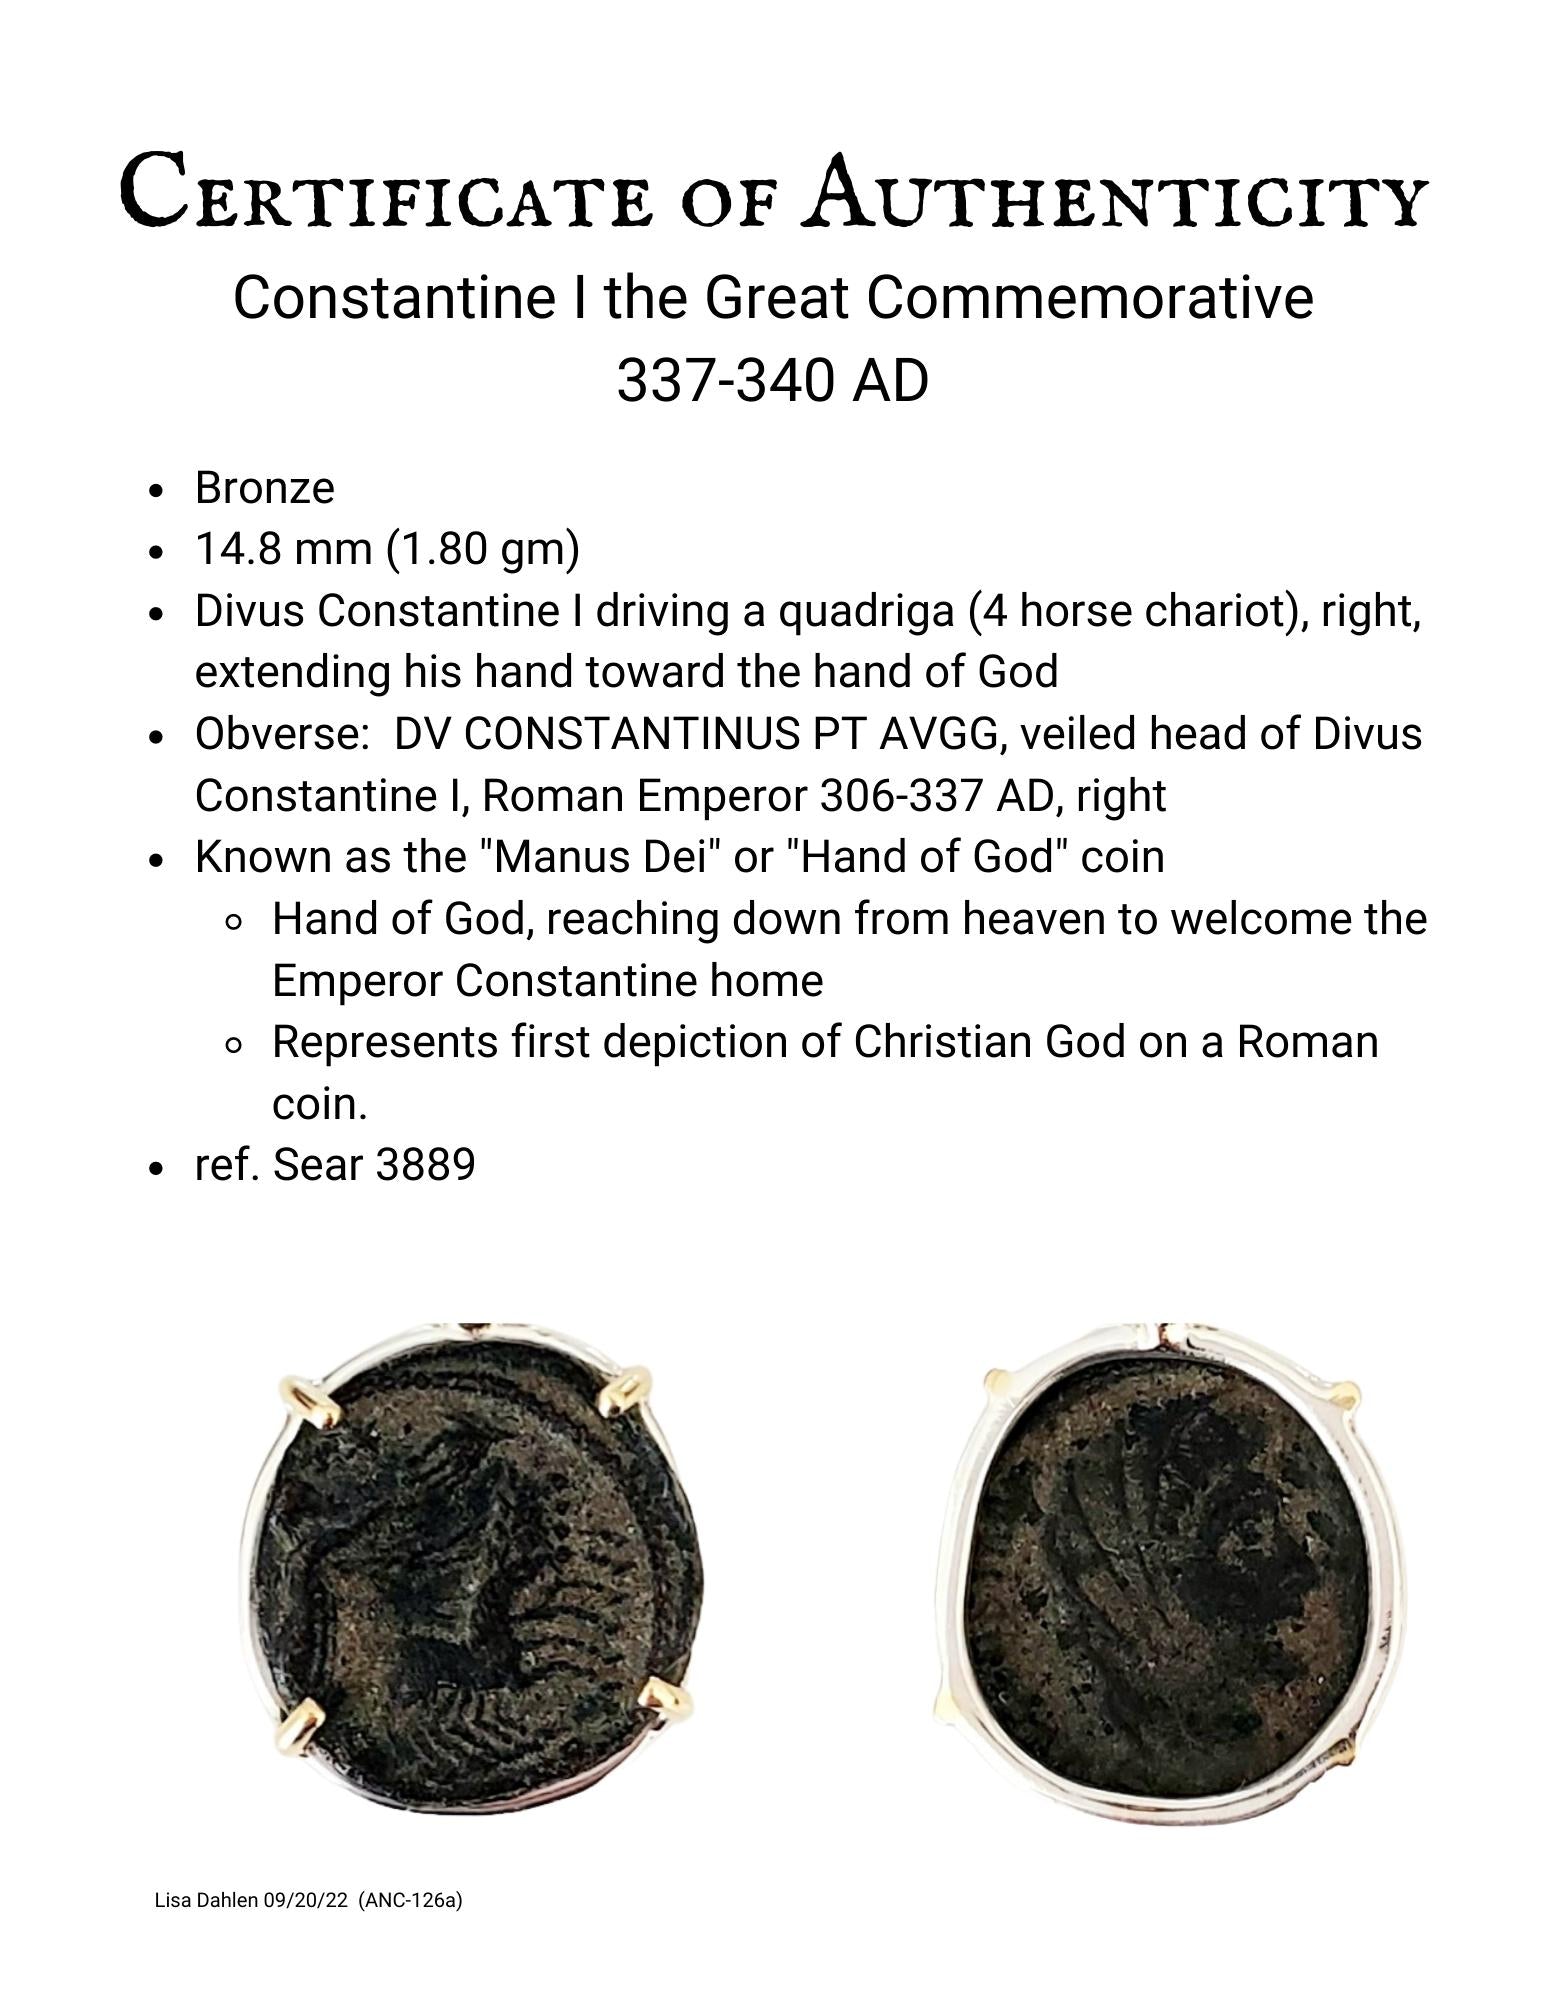 Authenticity Certificate for Hand of God Constantine the Great Ancient Coin